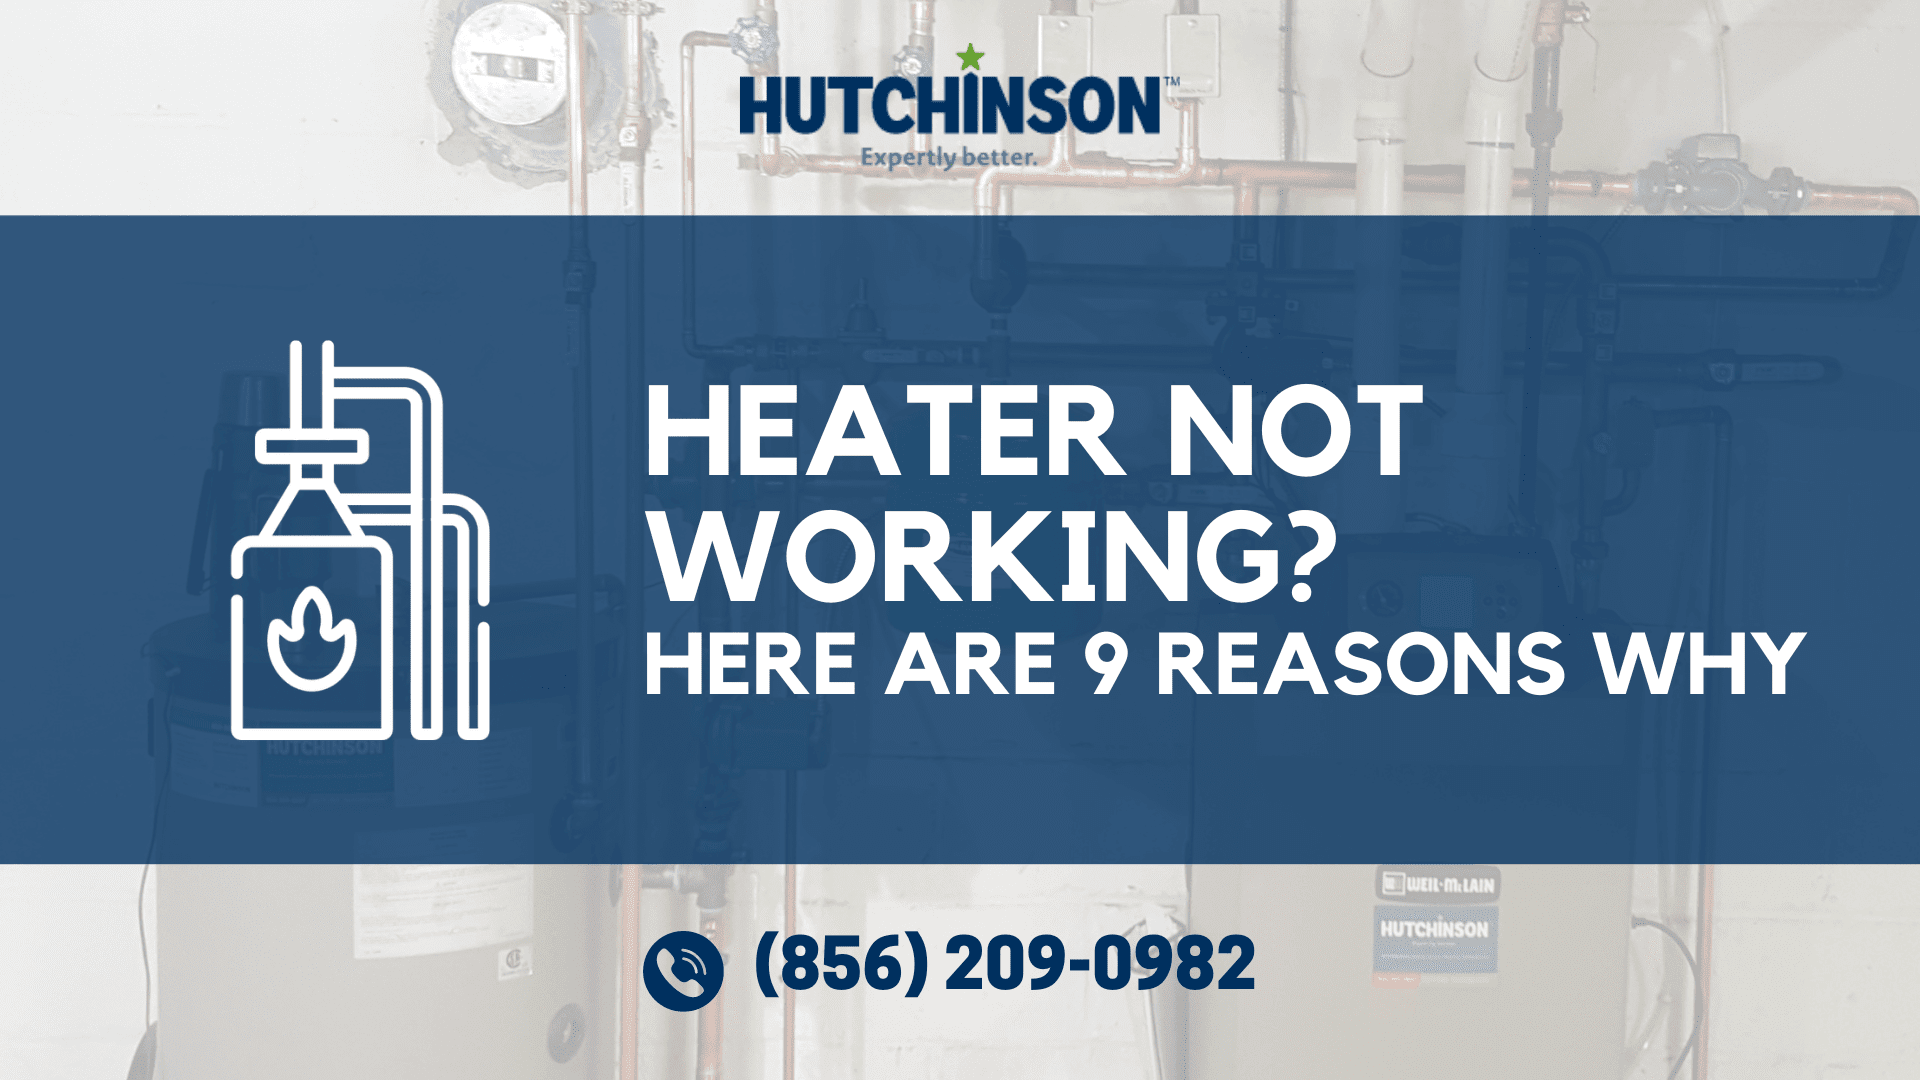 Heater Not Working? Here are 9 Reasons Why